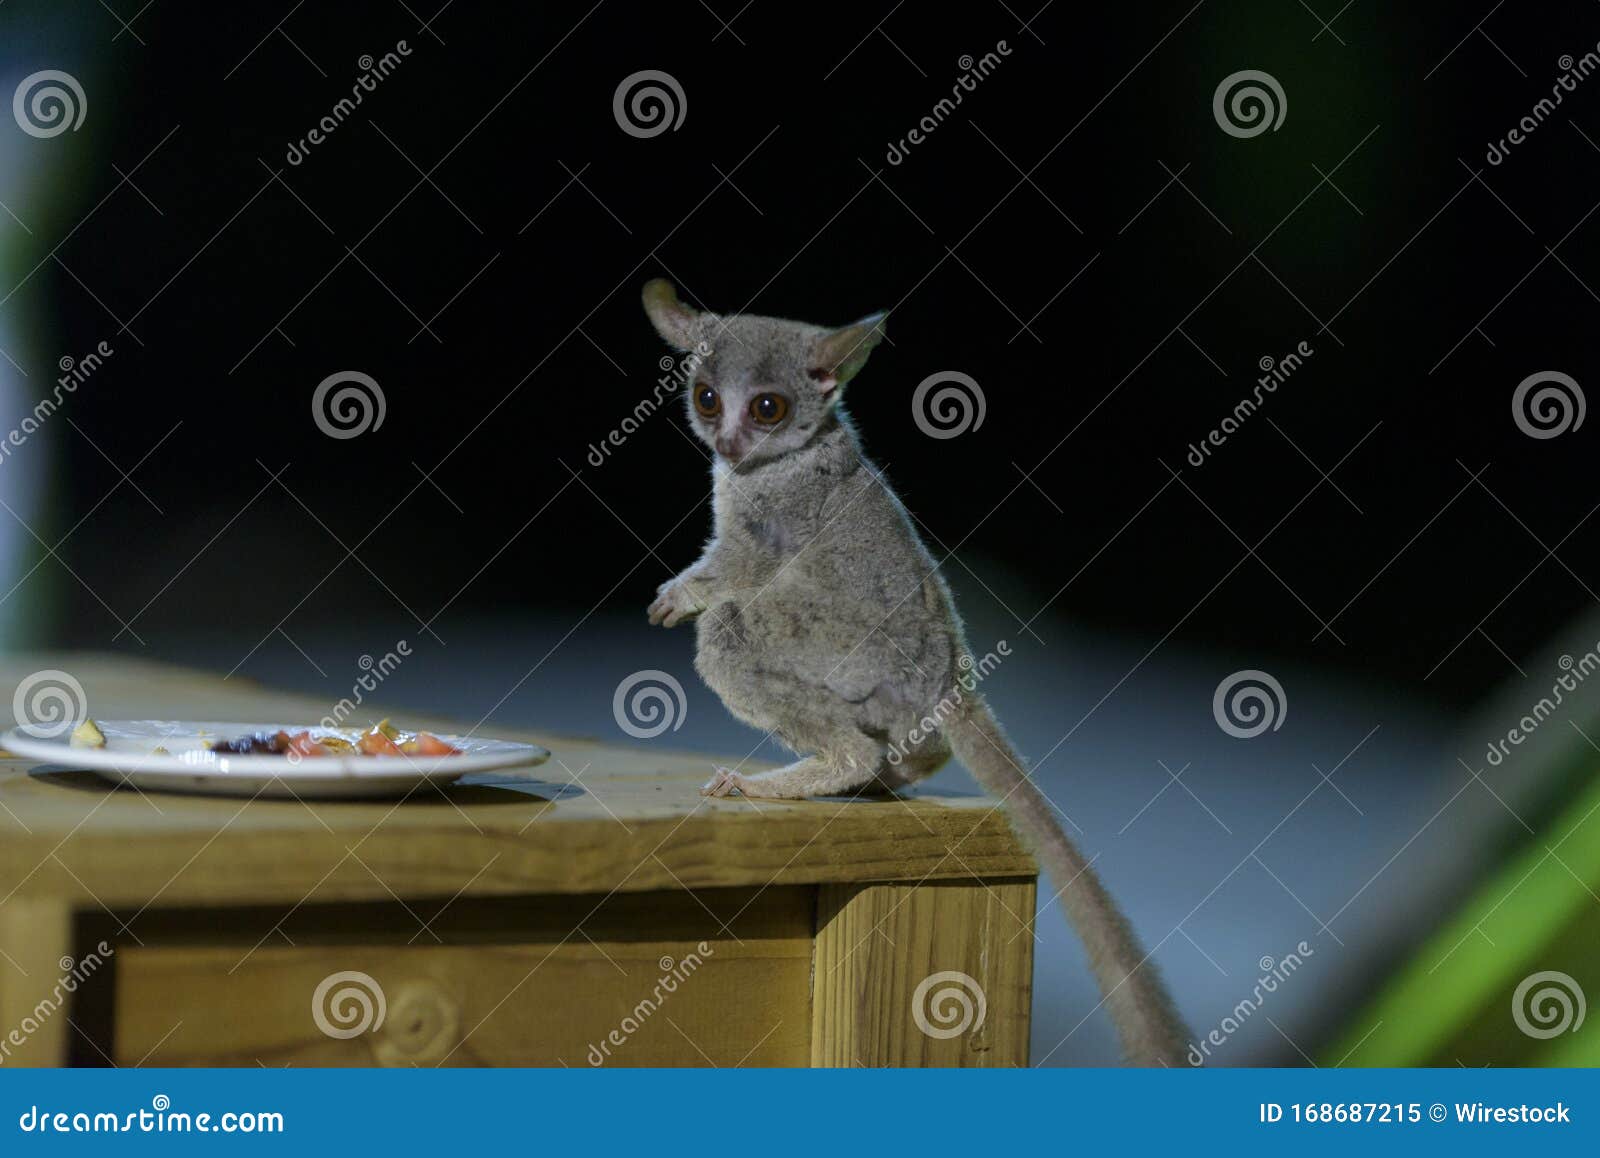 Bush Baby Eating From A Plate Stock Image - Image of ...